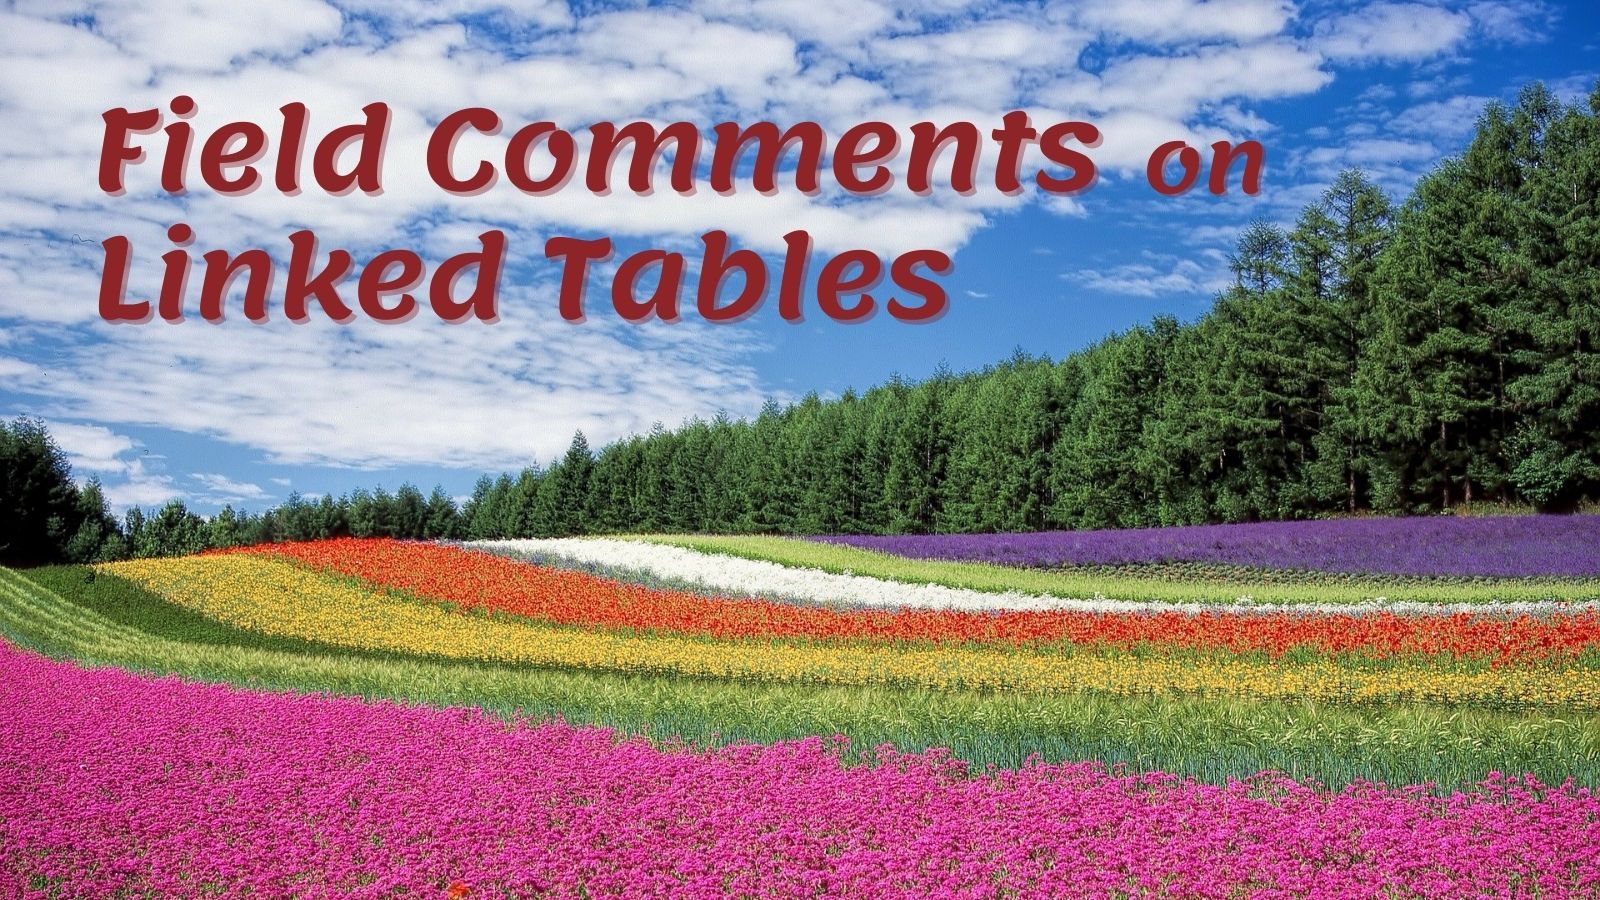 Field Comments on Linked Tables